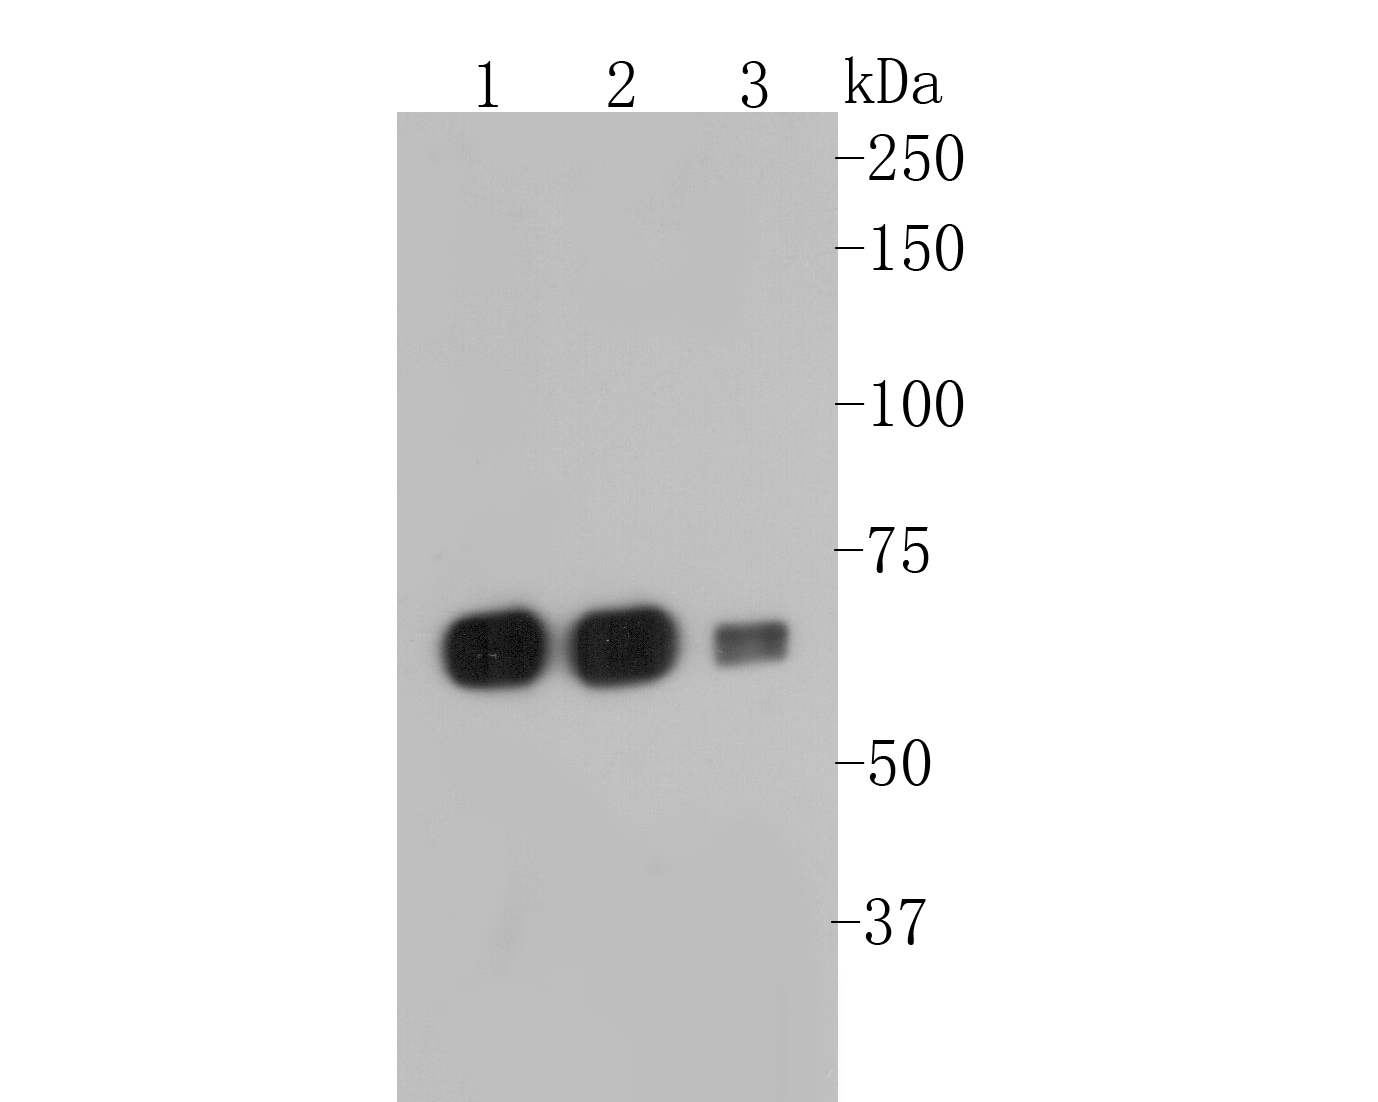 Western blot analysis of SERPINC1 on different lysates. Proteins were transferred to a PVDF membrane and blocked with 5% BSA in PBS for 1 hour at room temperature. The primary antibody (EM1901-10, 1/500) was used in 5% BSA at room temperature for 2 hours. Goat Anti-Mouse IgG - HRP Secondary Antibody (HA1006) at 1:5,000 dilution was used for 1 hour at room temperature.<br />
Positive control: <br />
Lane 1: HL-60 cell lysate<br />
Lane 2: HepG2 cell lysate<br />
Lane 3: SiHa cell lysate